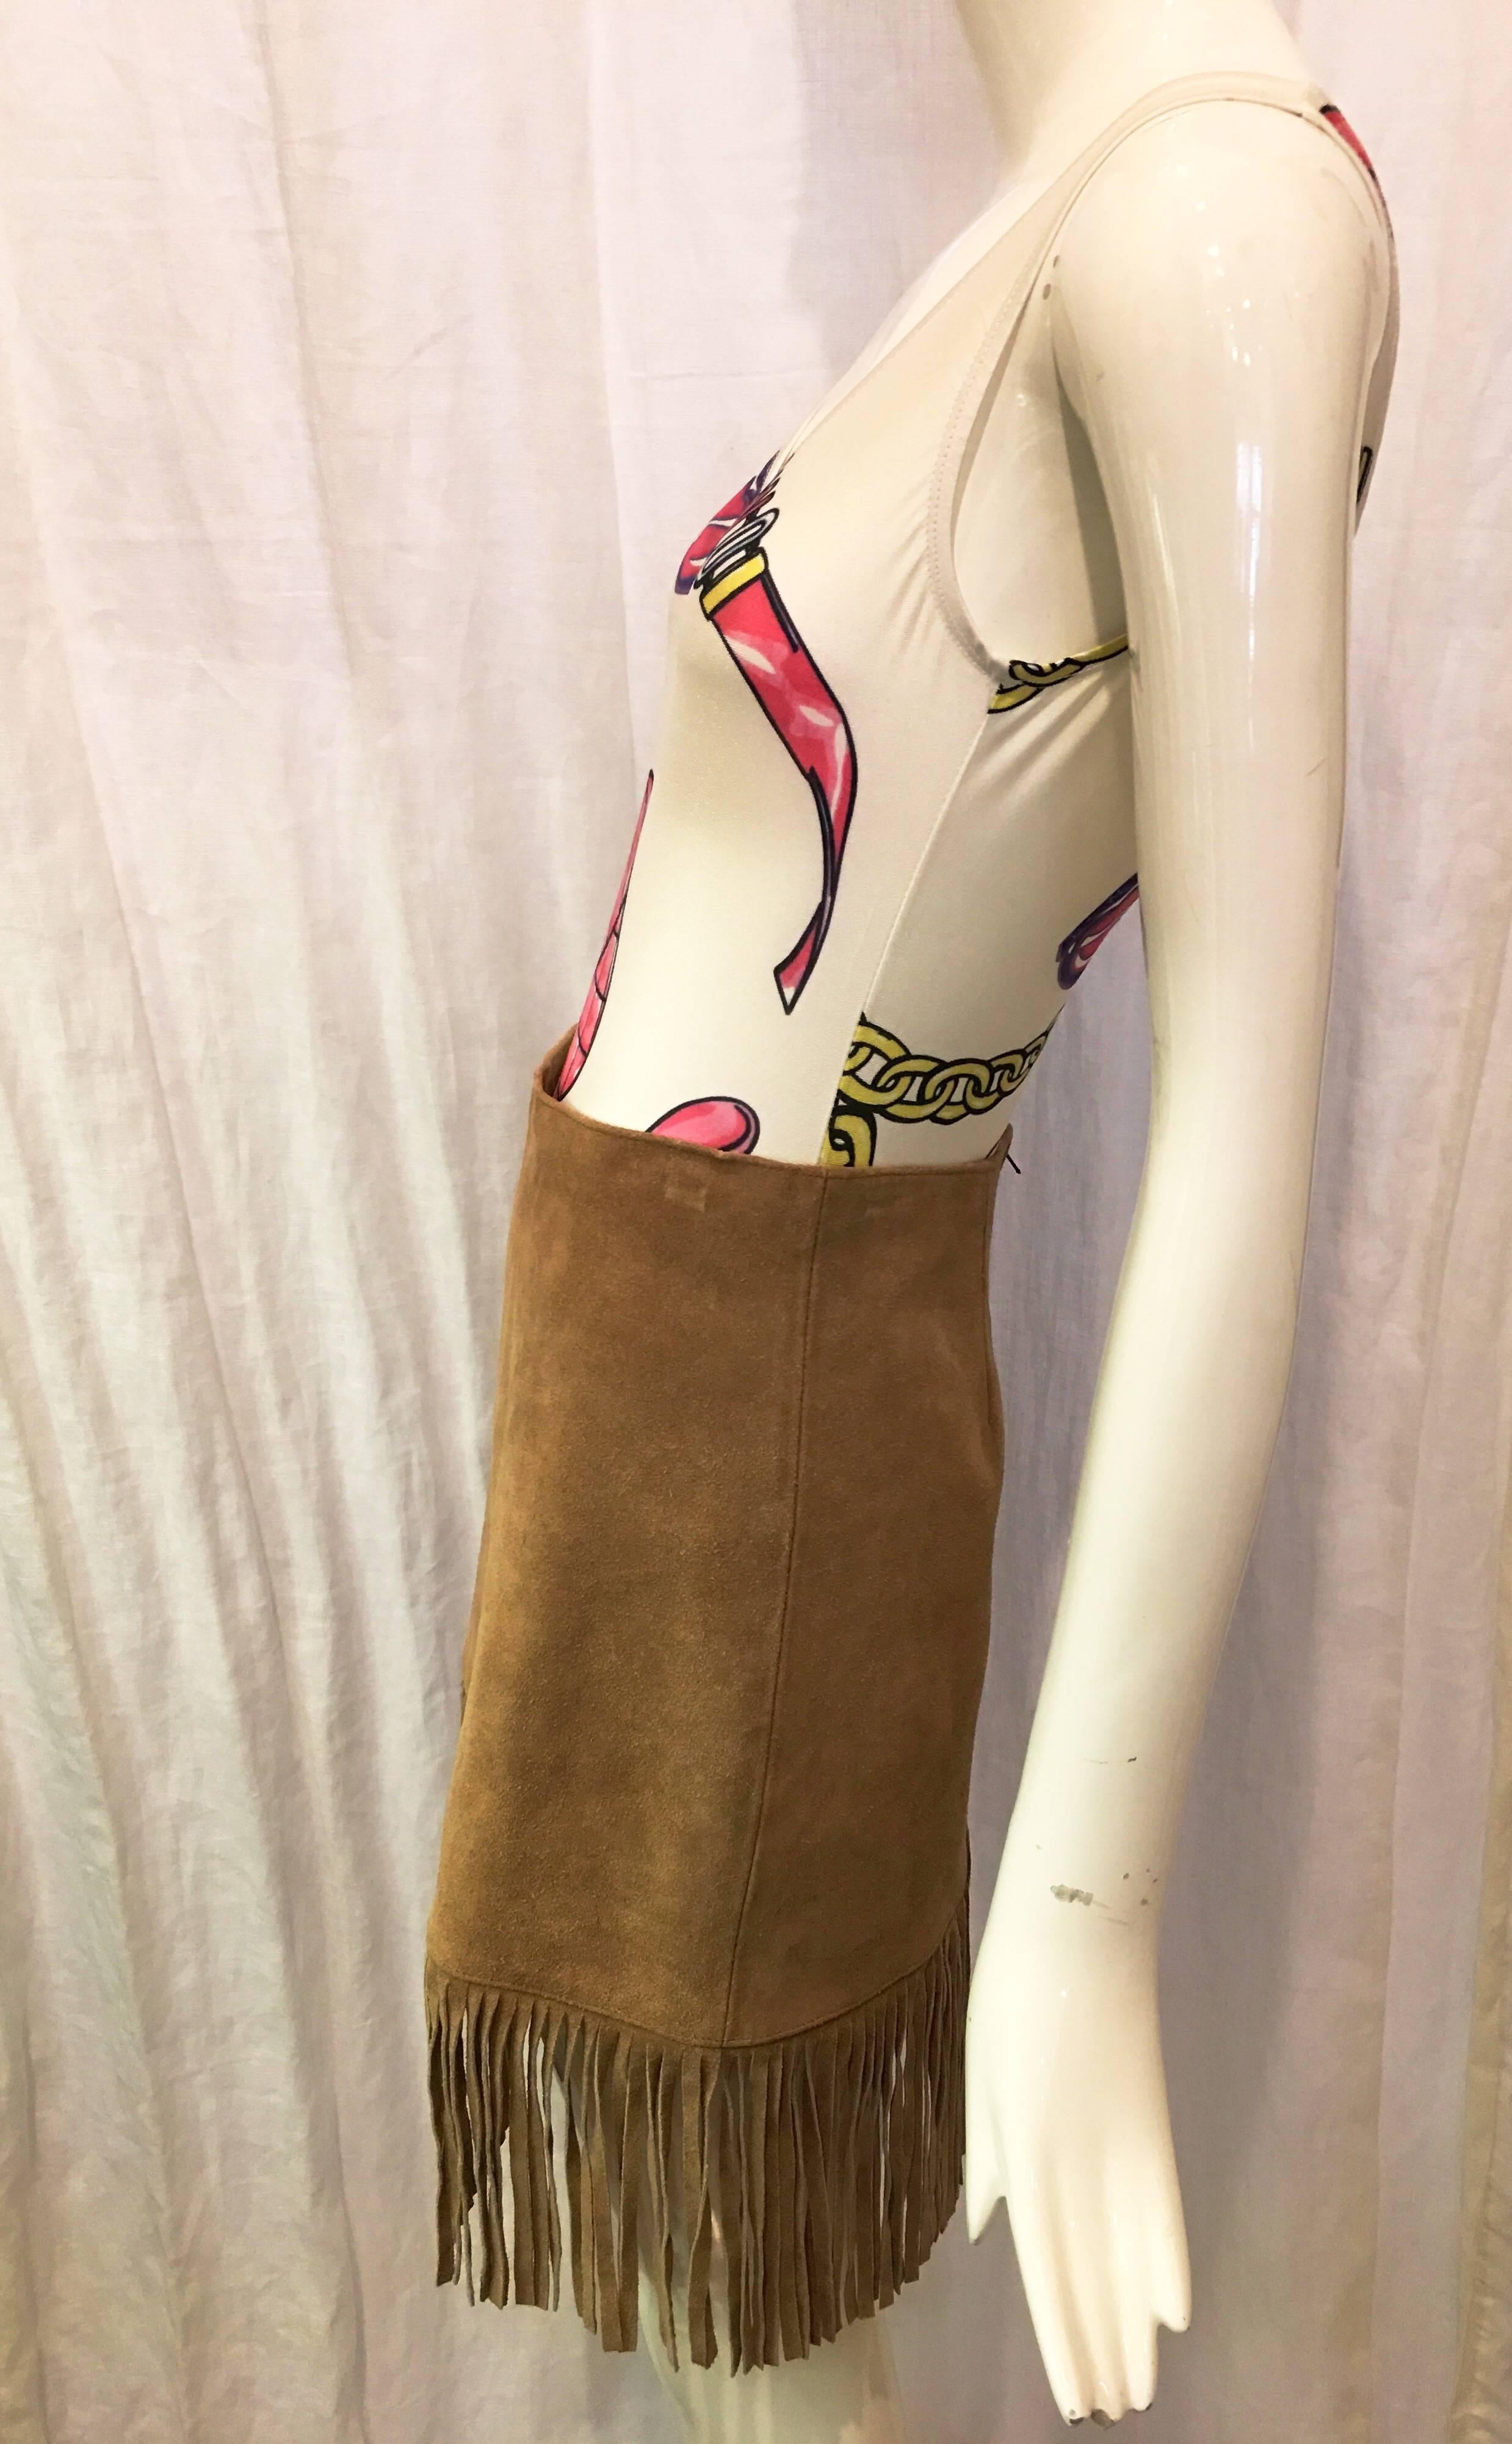 Tan suede straight skirt with fringe trim. Trim is 7